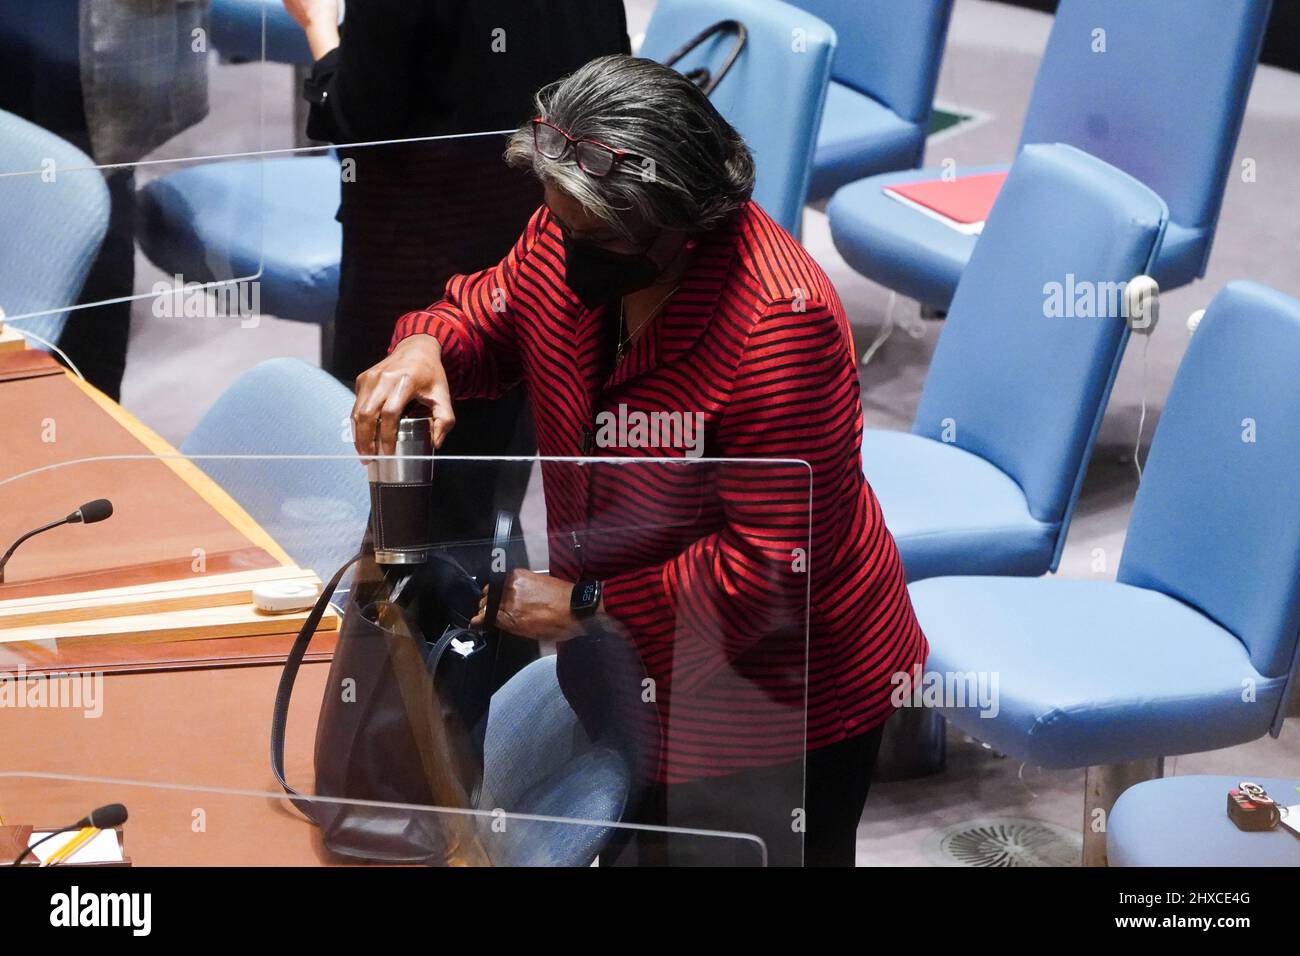 U.S. Ambassador to the U.N. Linda Thomas-Greenfield attends the United Nations Security Council meeting on Threats to International Peace and Security, following Russia's invasion of Ukraine, in New York City, U.S. March 11, 2022. REUTERS/Carlo Allegri Stock Photo